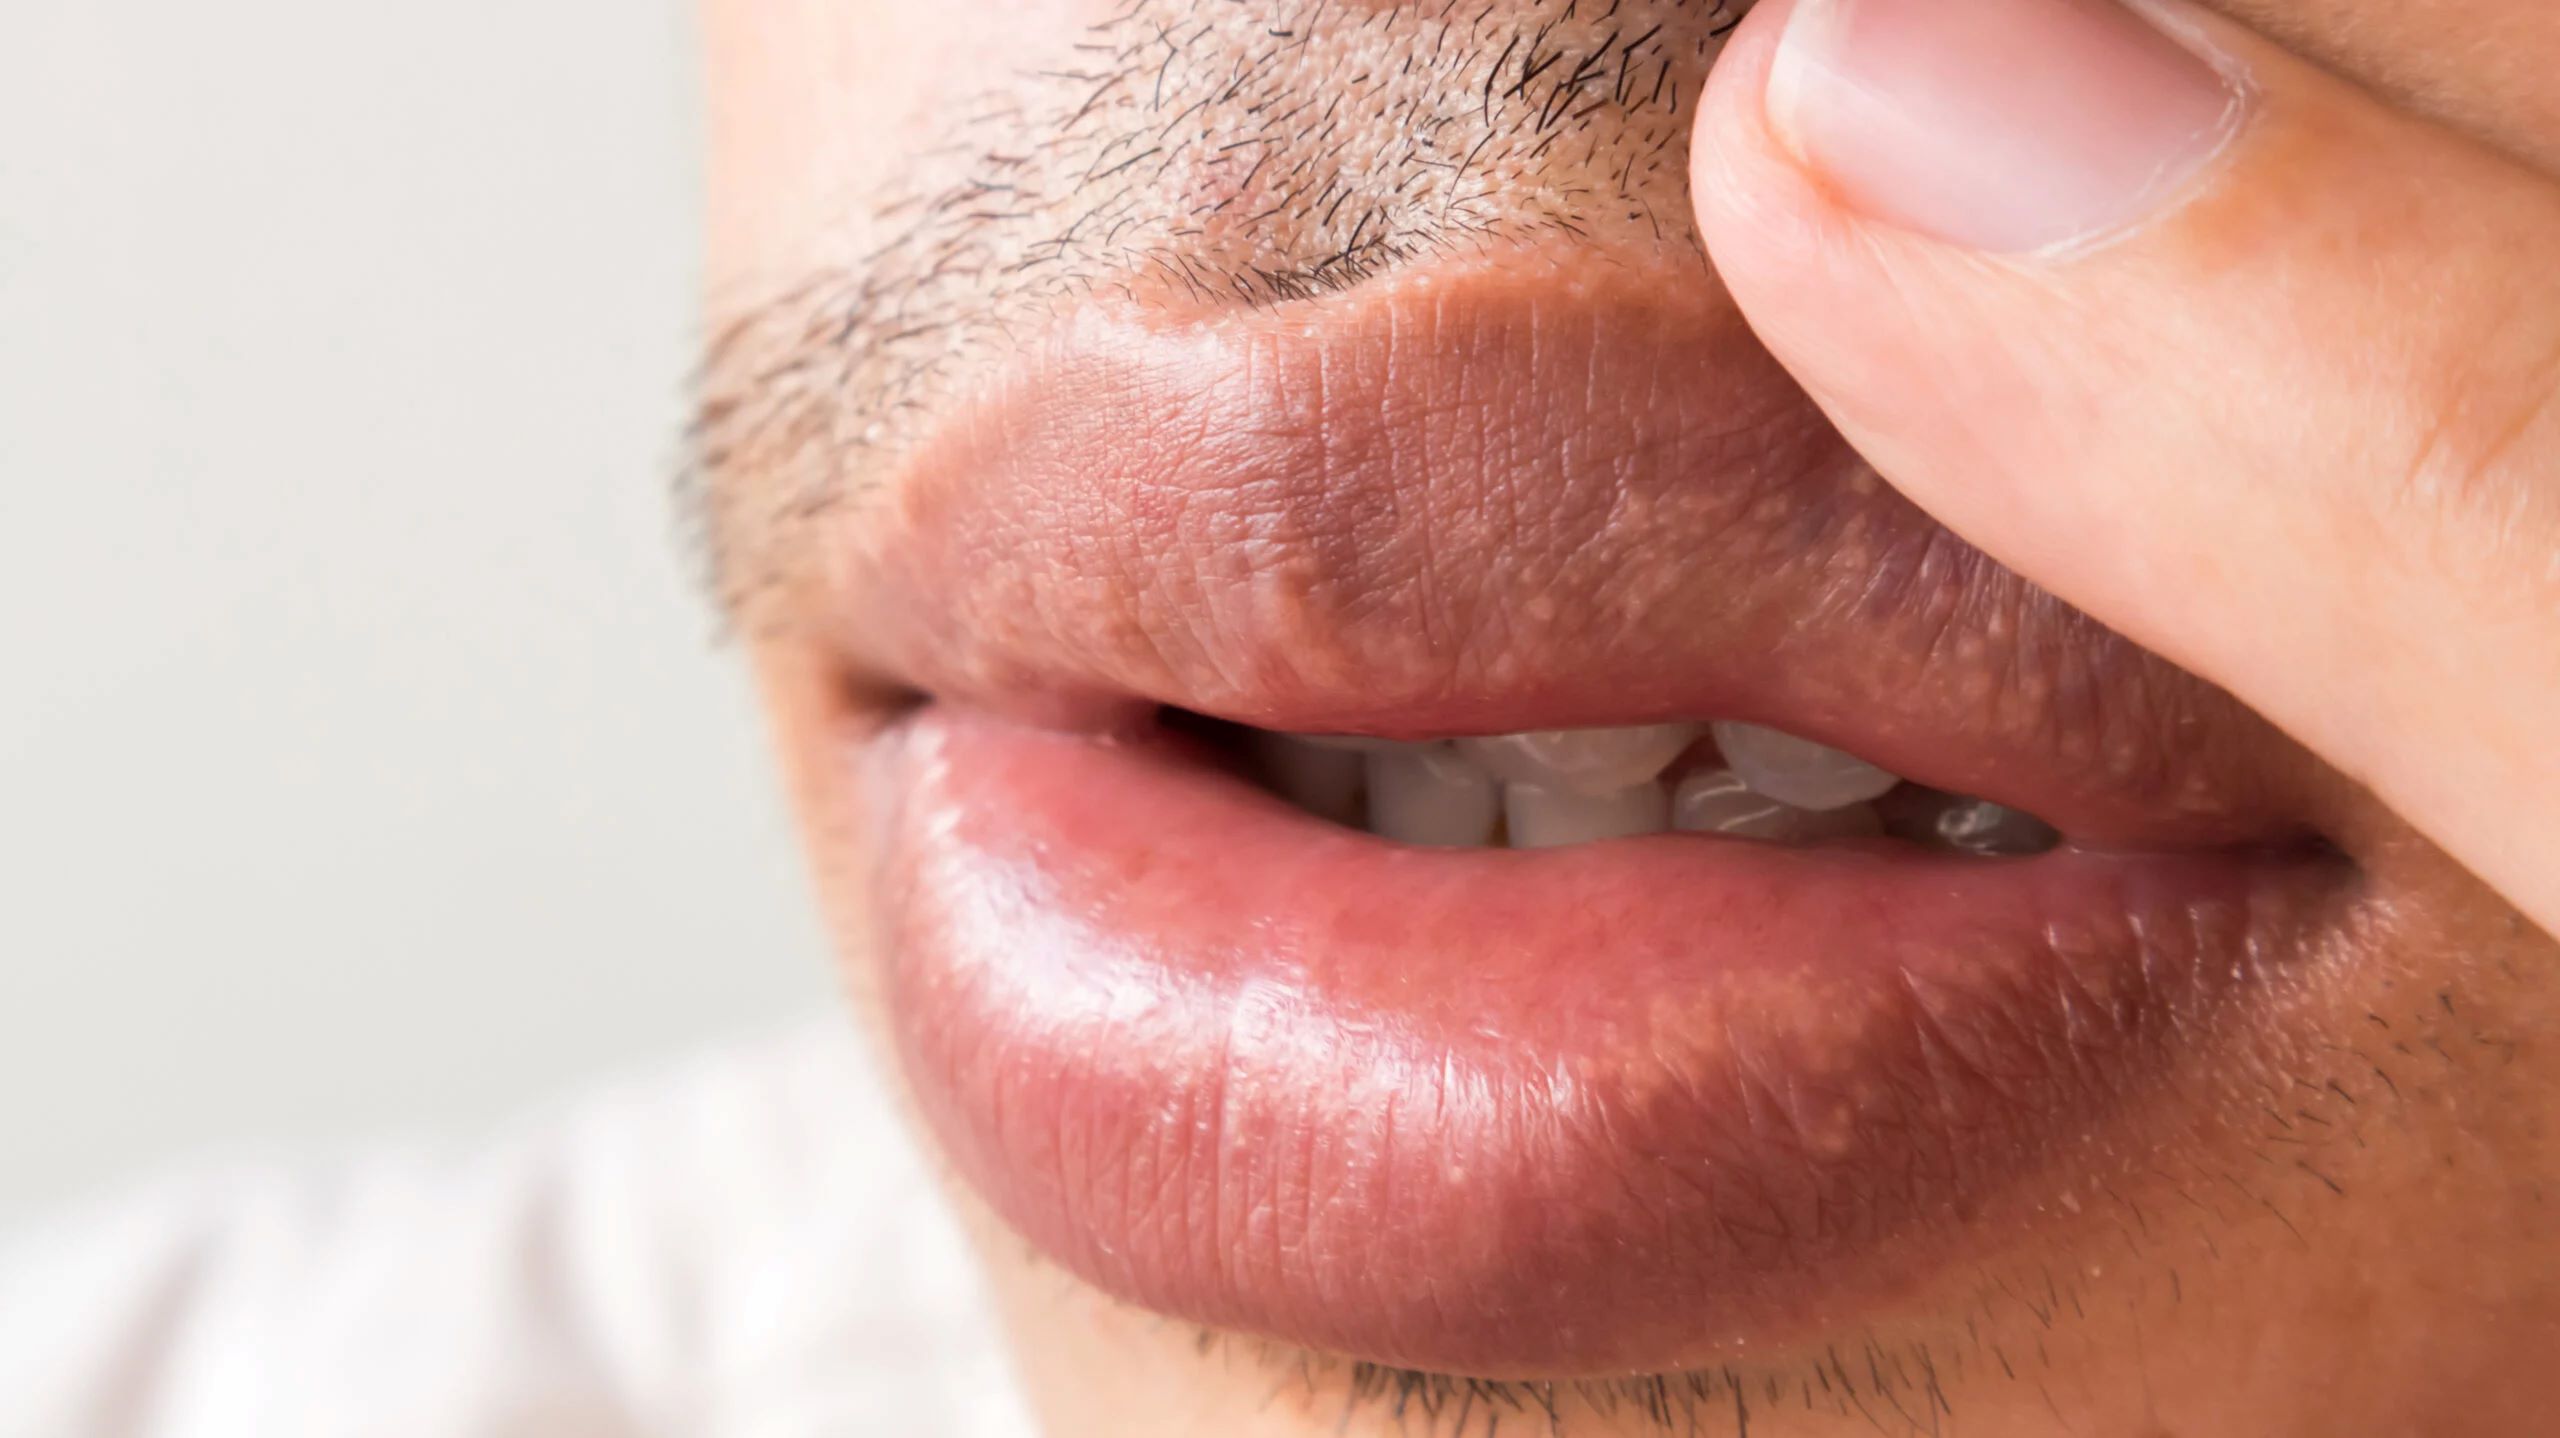 The Surprising Complications Of Exfoliative Cheilitis You Never Knew About